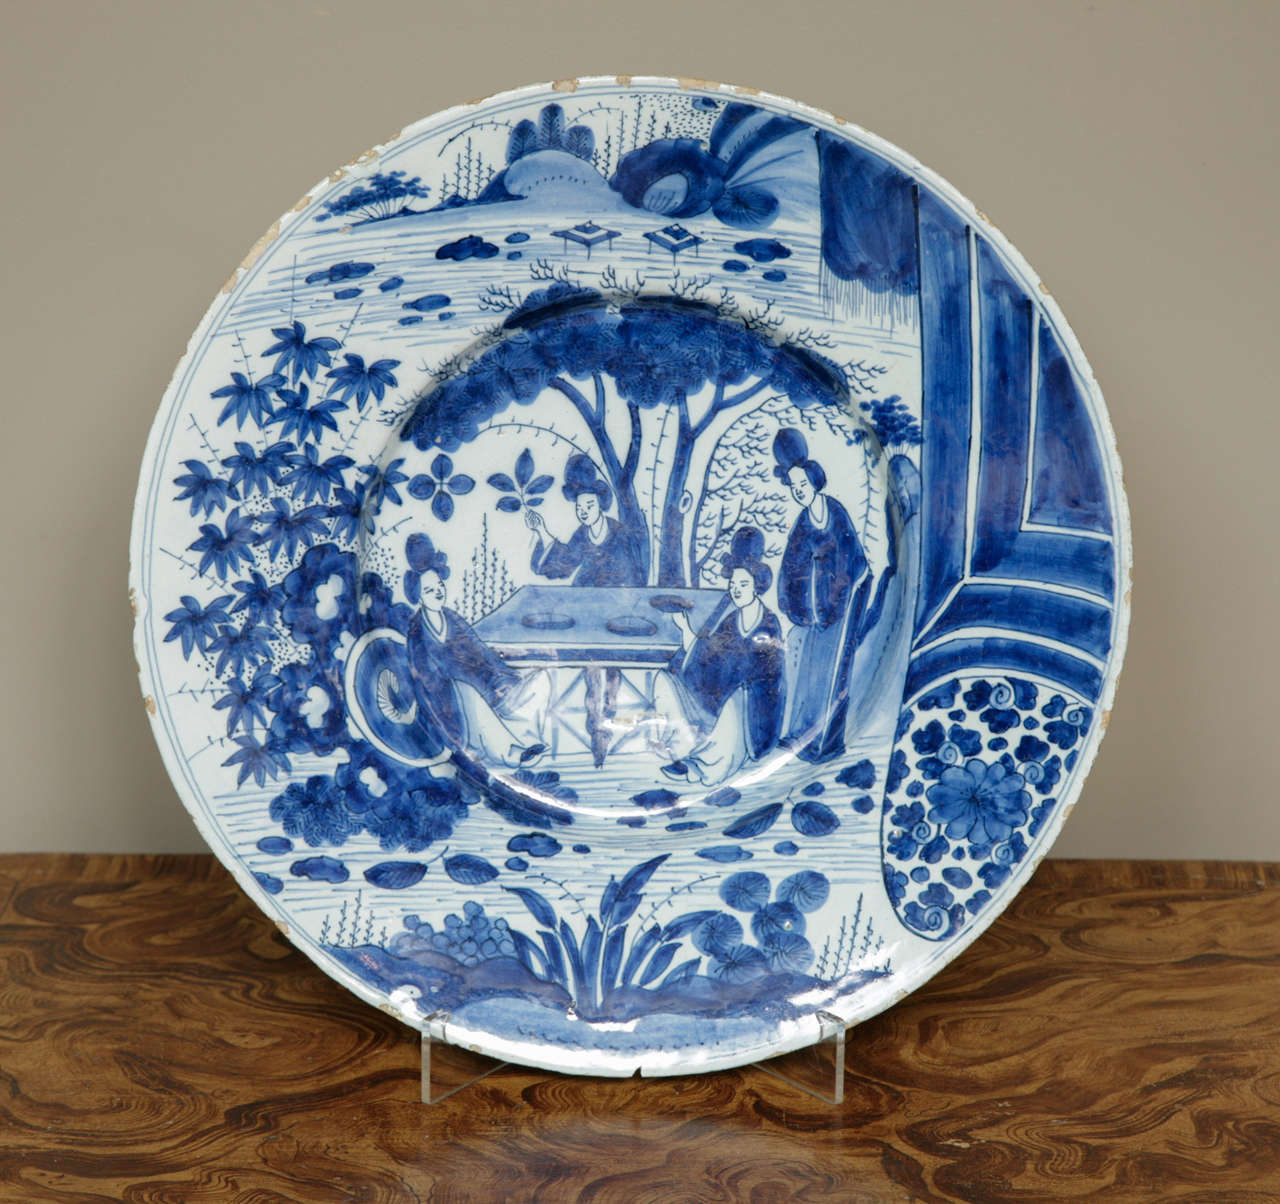 Kam was the owner of Delftware factory 